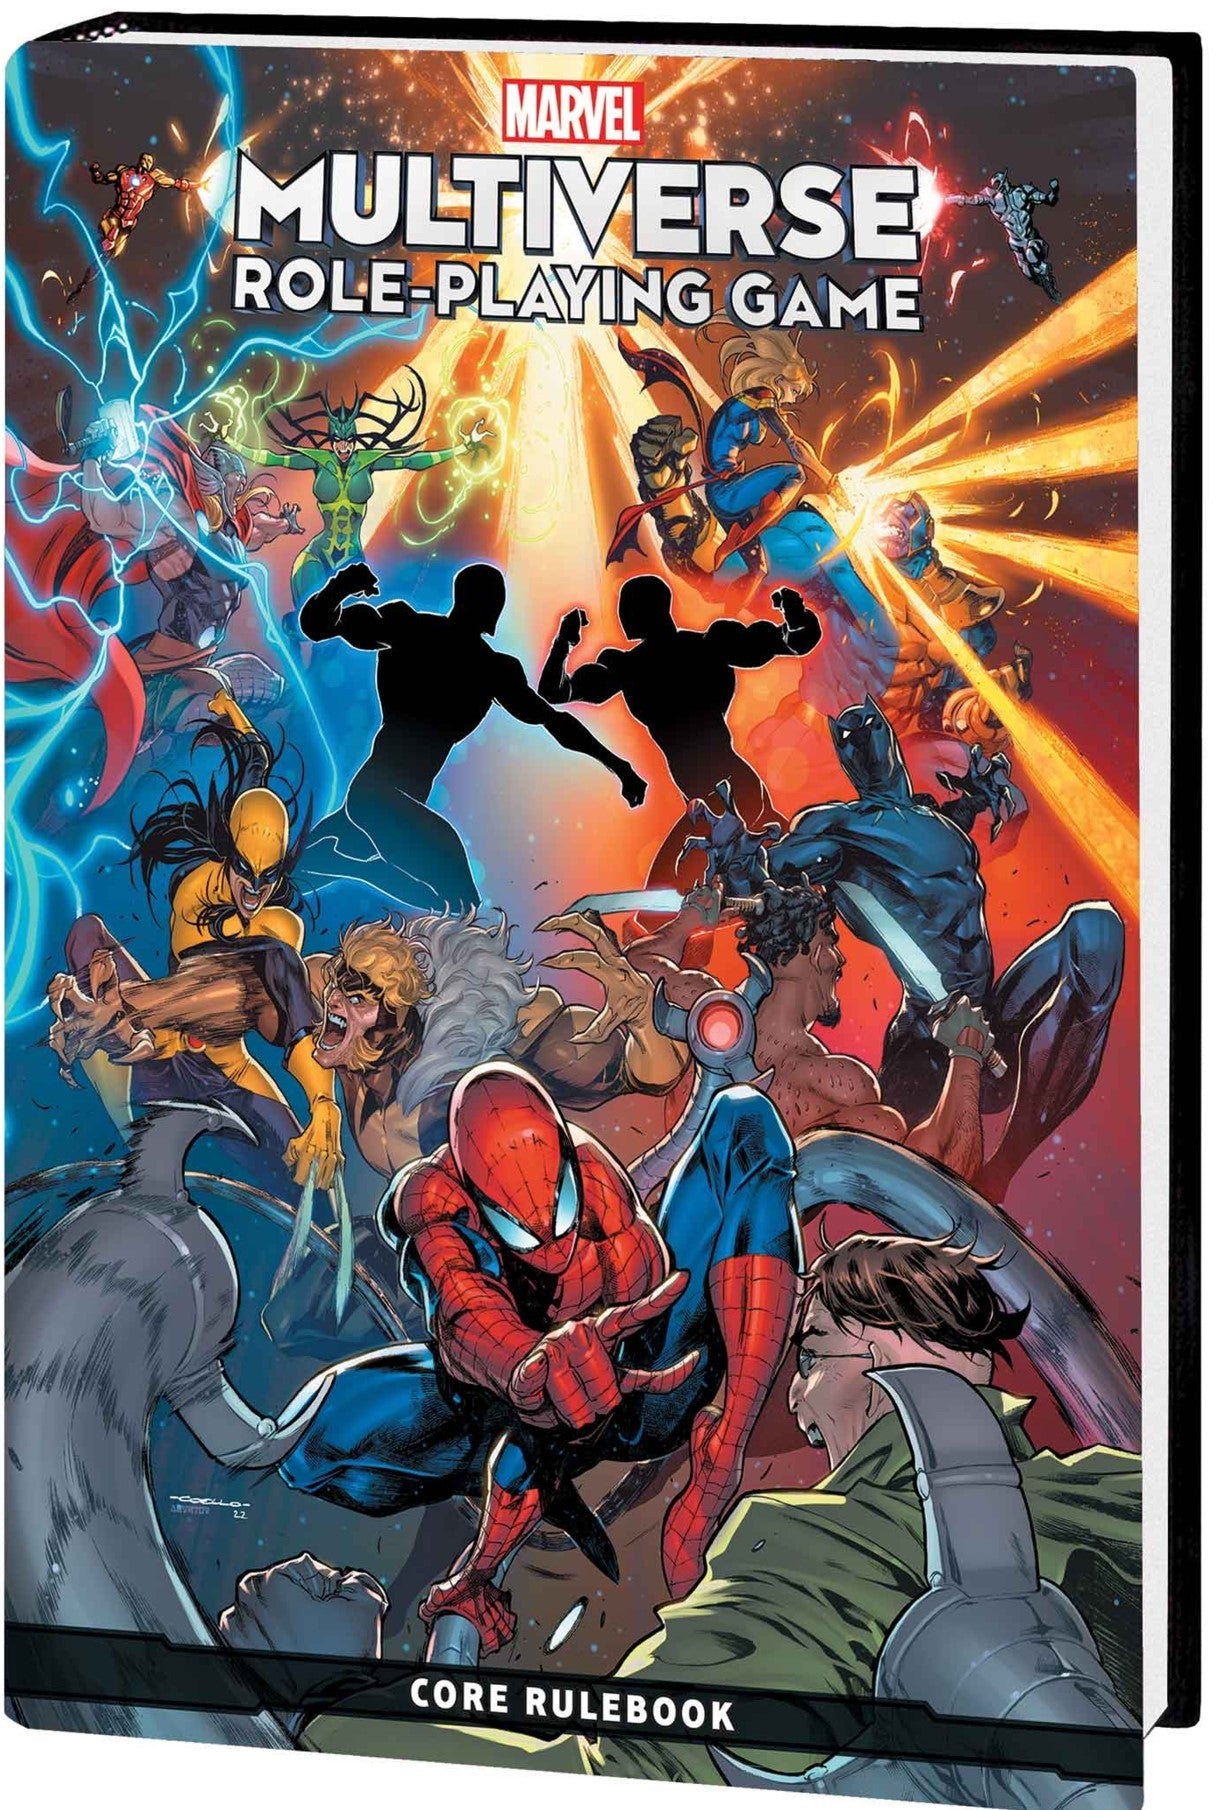 Marvel Multiverse RPG: Core Rulebook from PENGUIN RANDOM HOUSE LLC at The Compleat Strategist